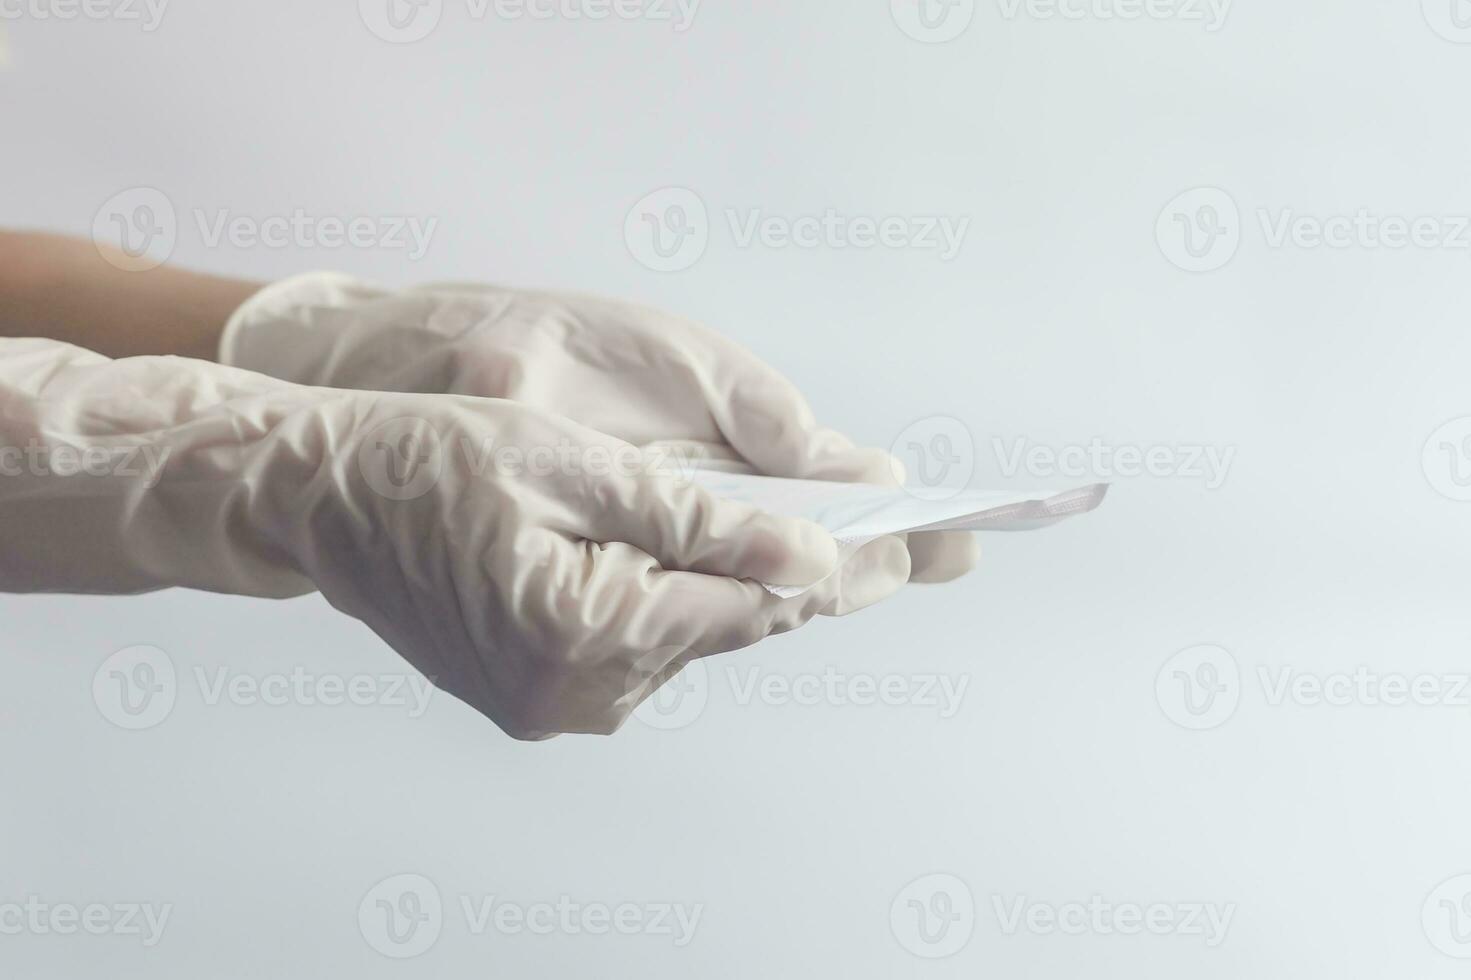 Female's hygiene products. Woman's hands in medical gloves holding sanitary napkins against white background. Period days concept showing feminine menstrual cycle. photo